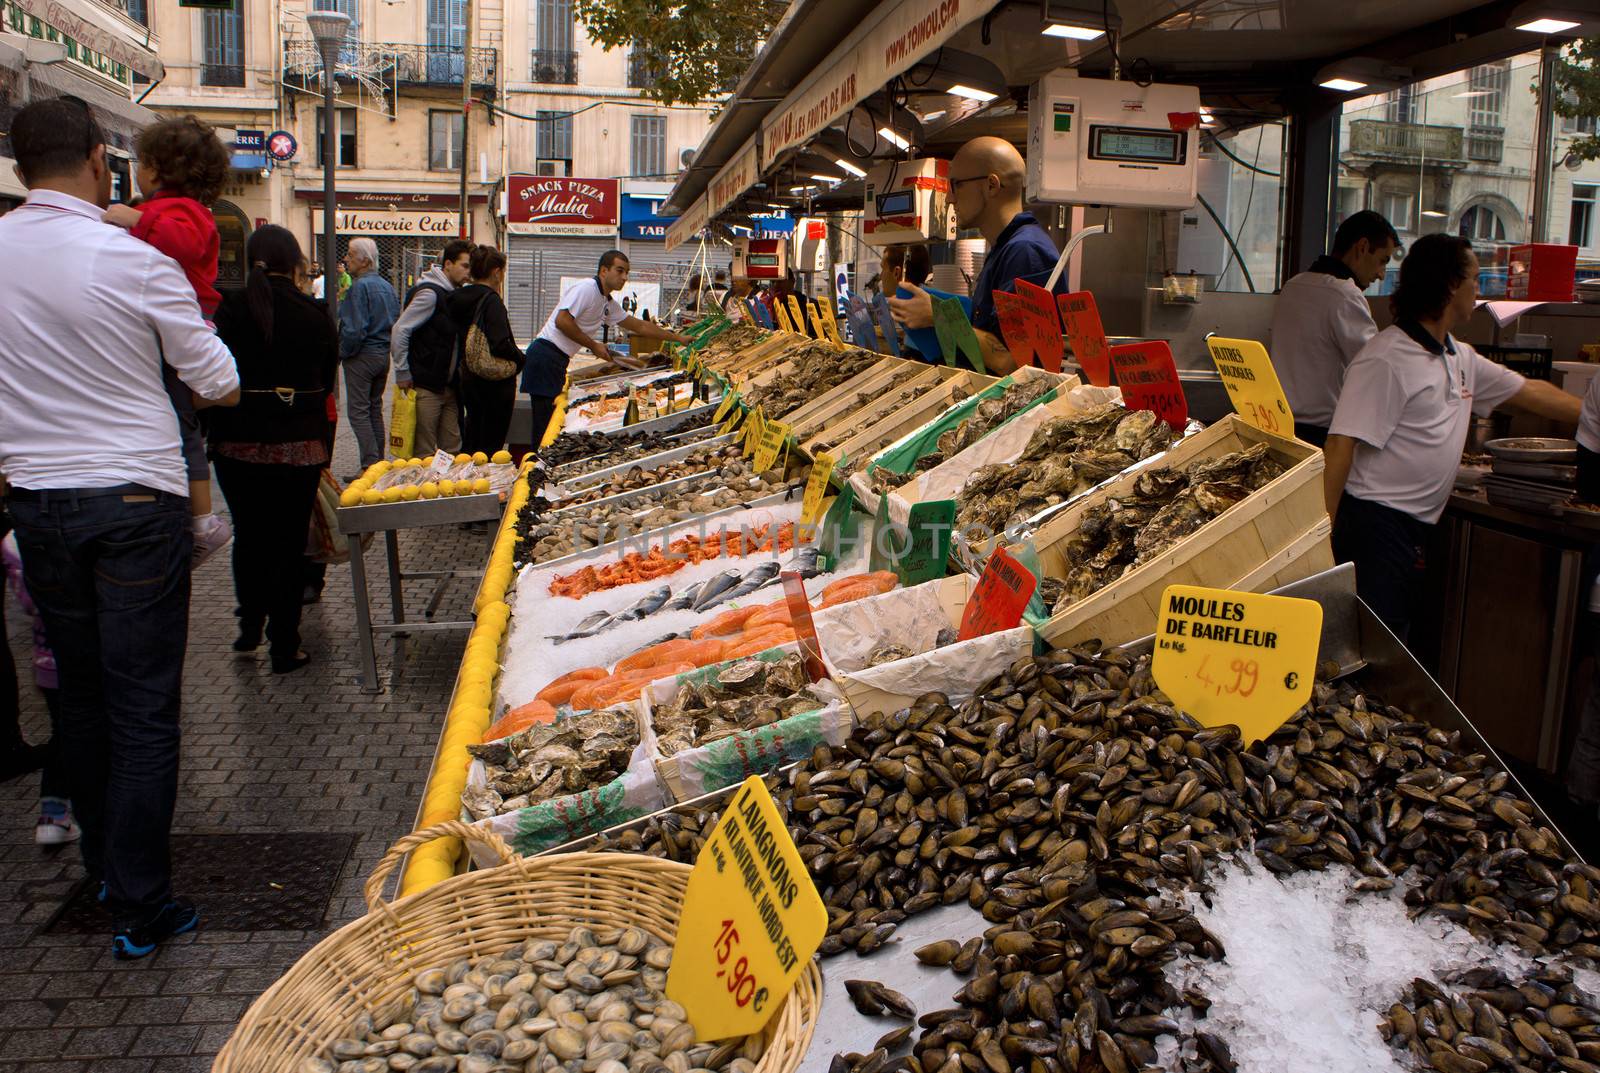 Fish Marquet in Marseille by photosil